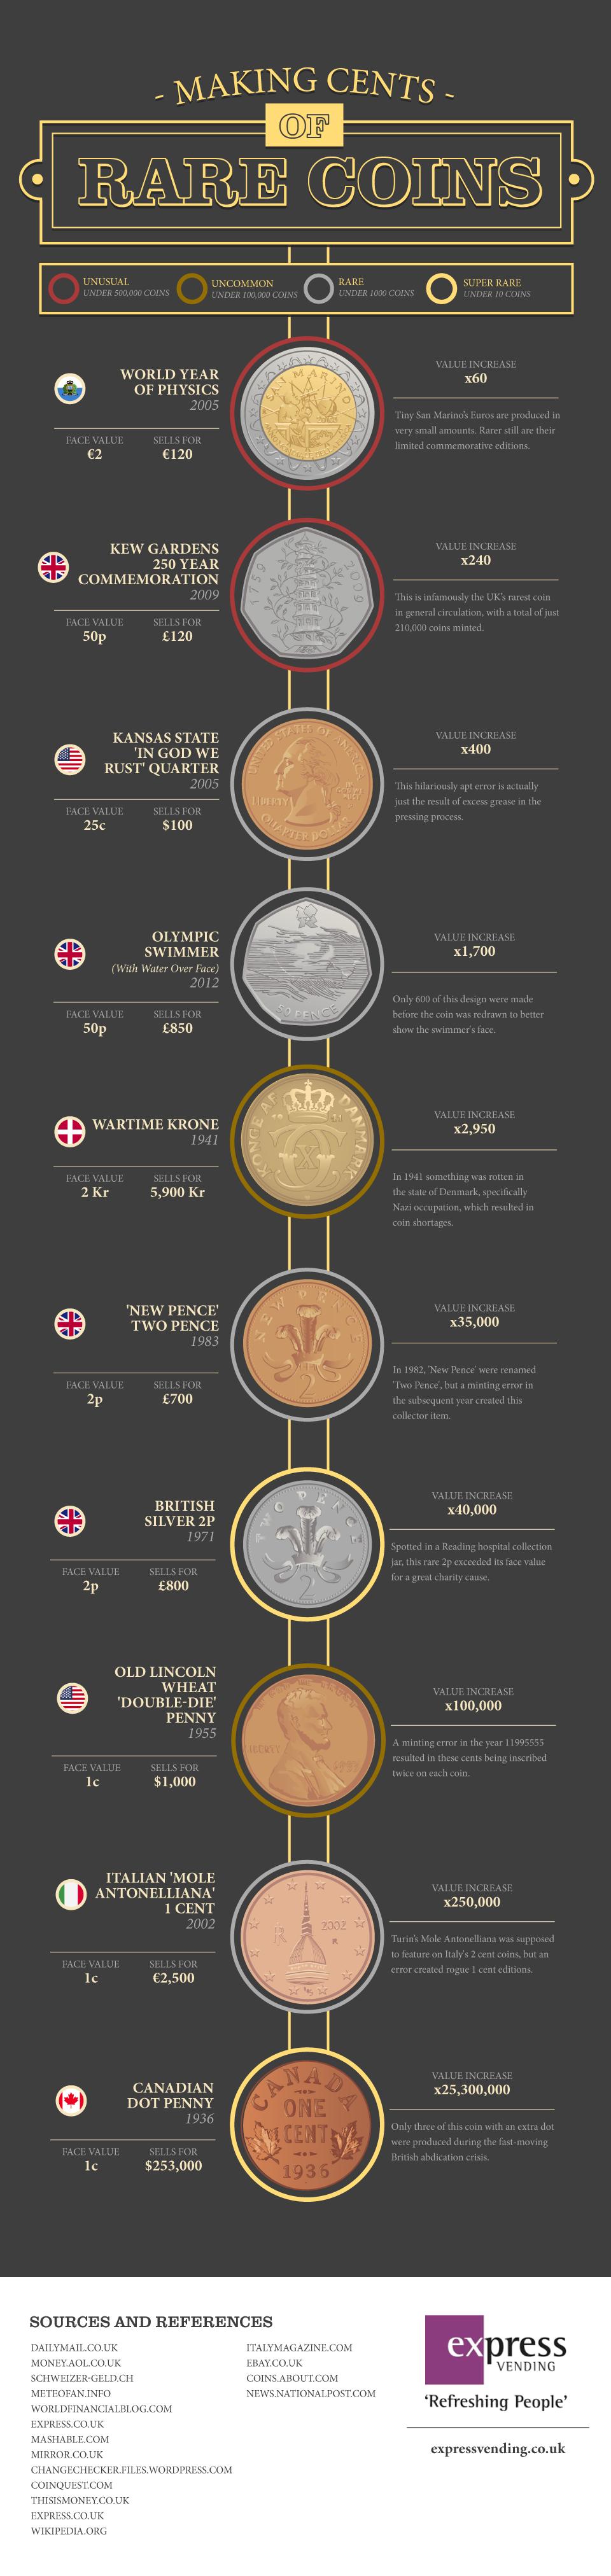 Making Cents of Rare Coins Infographic